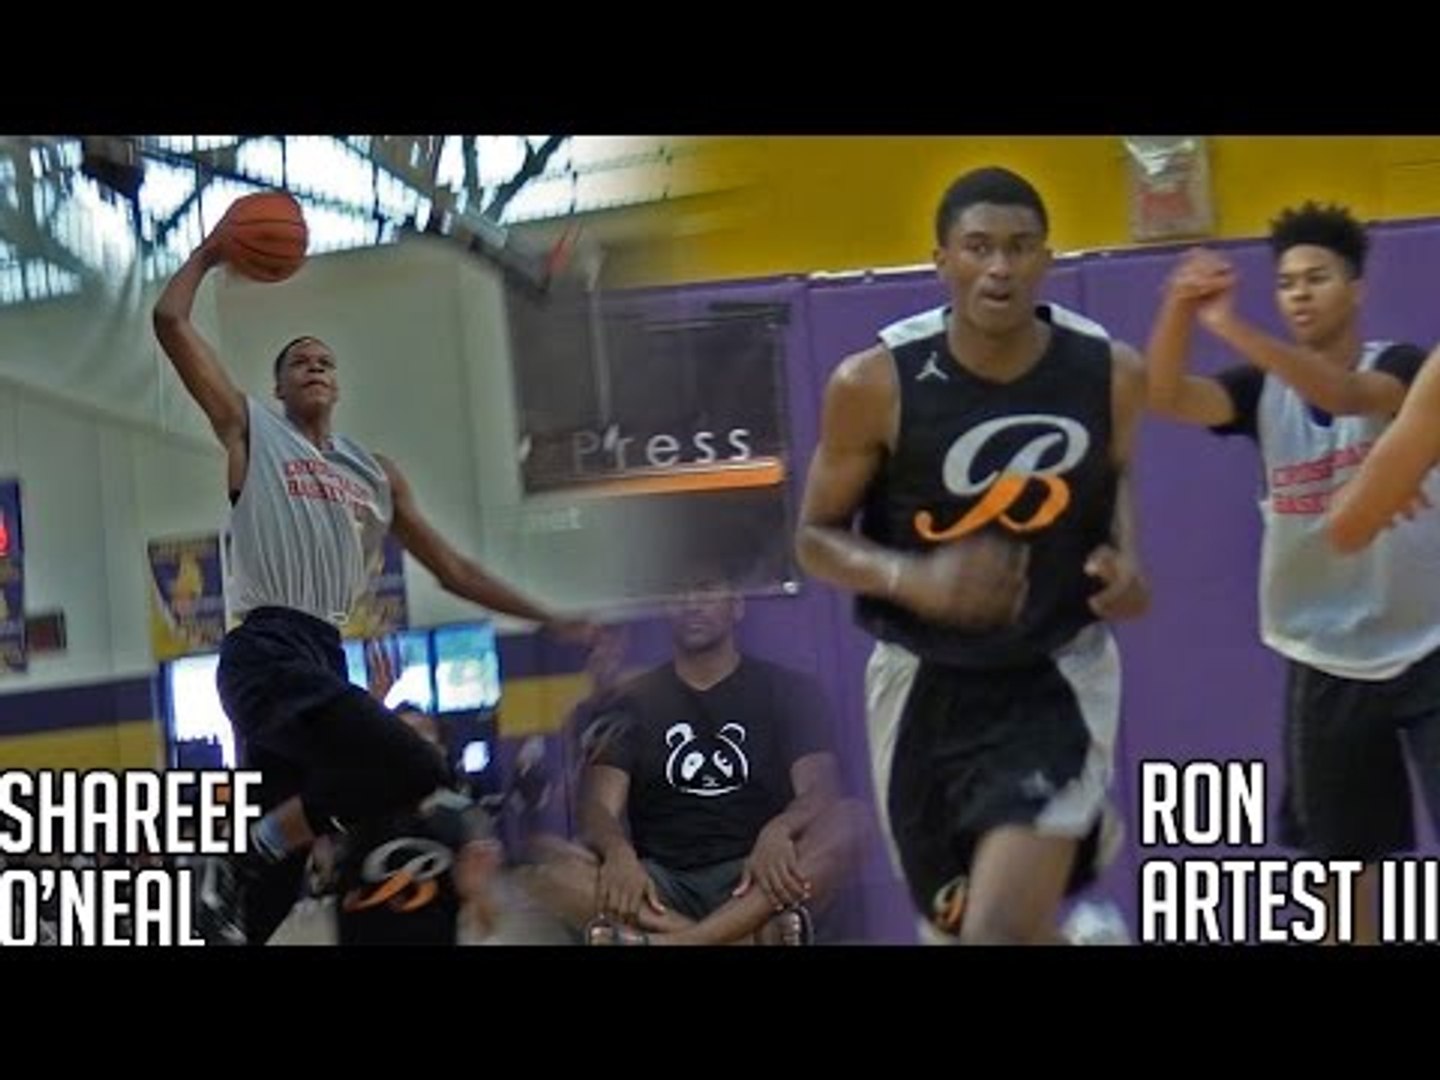 VIDEO: Ron Artest III, Shareef O'Neal matchup upstaged by game